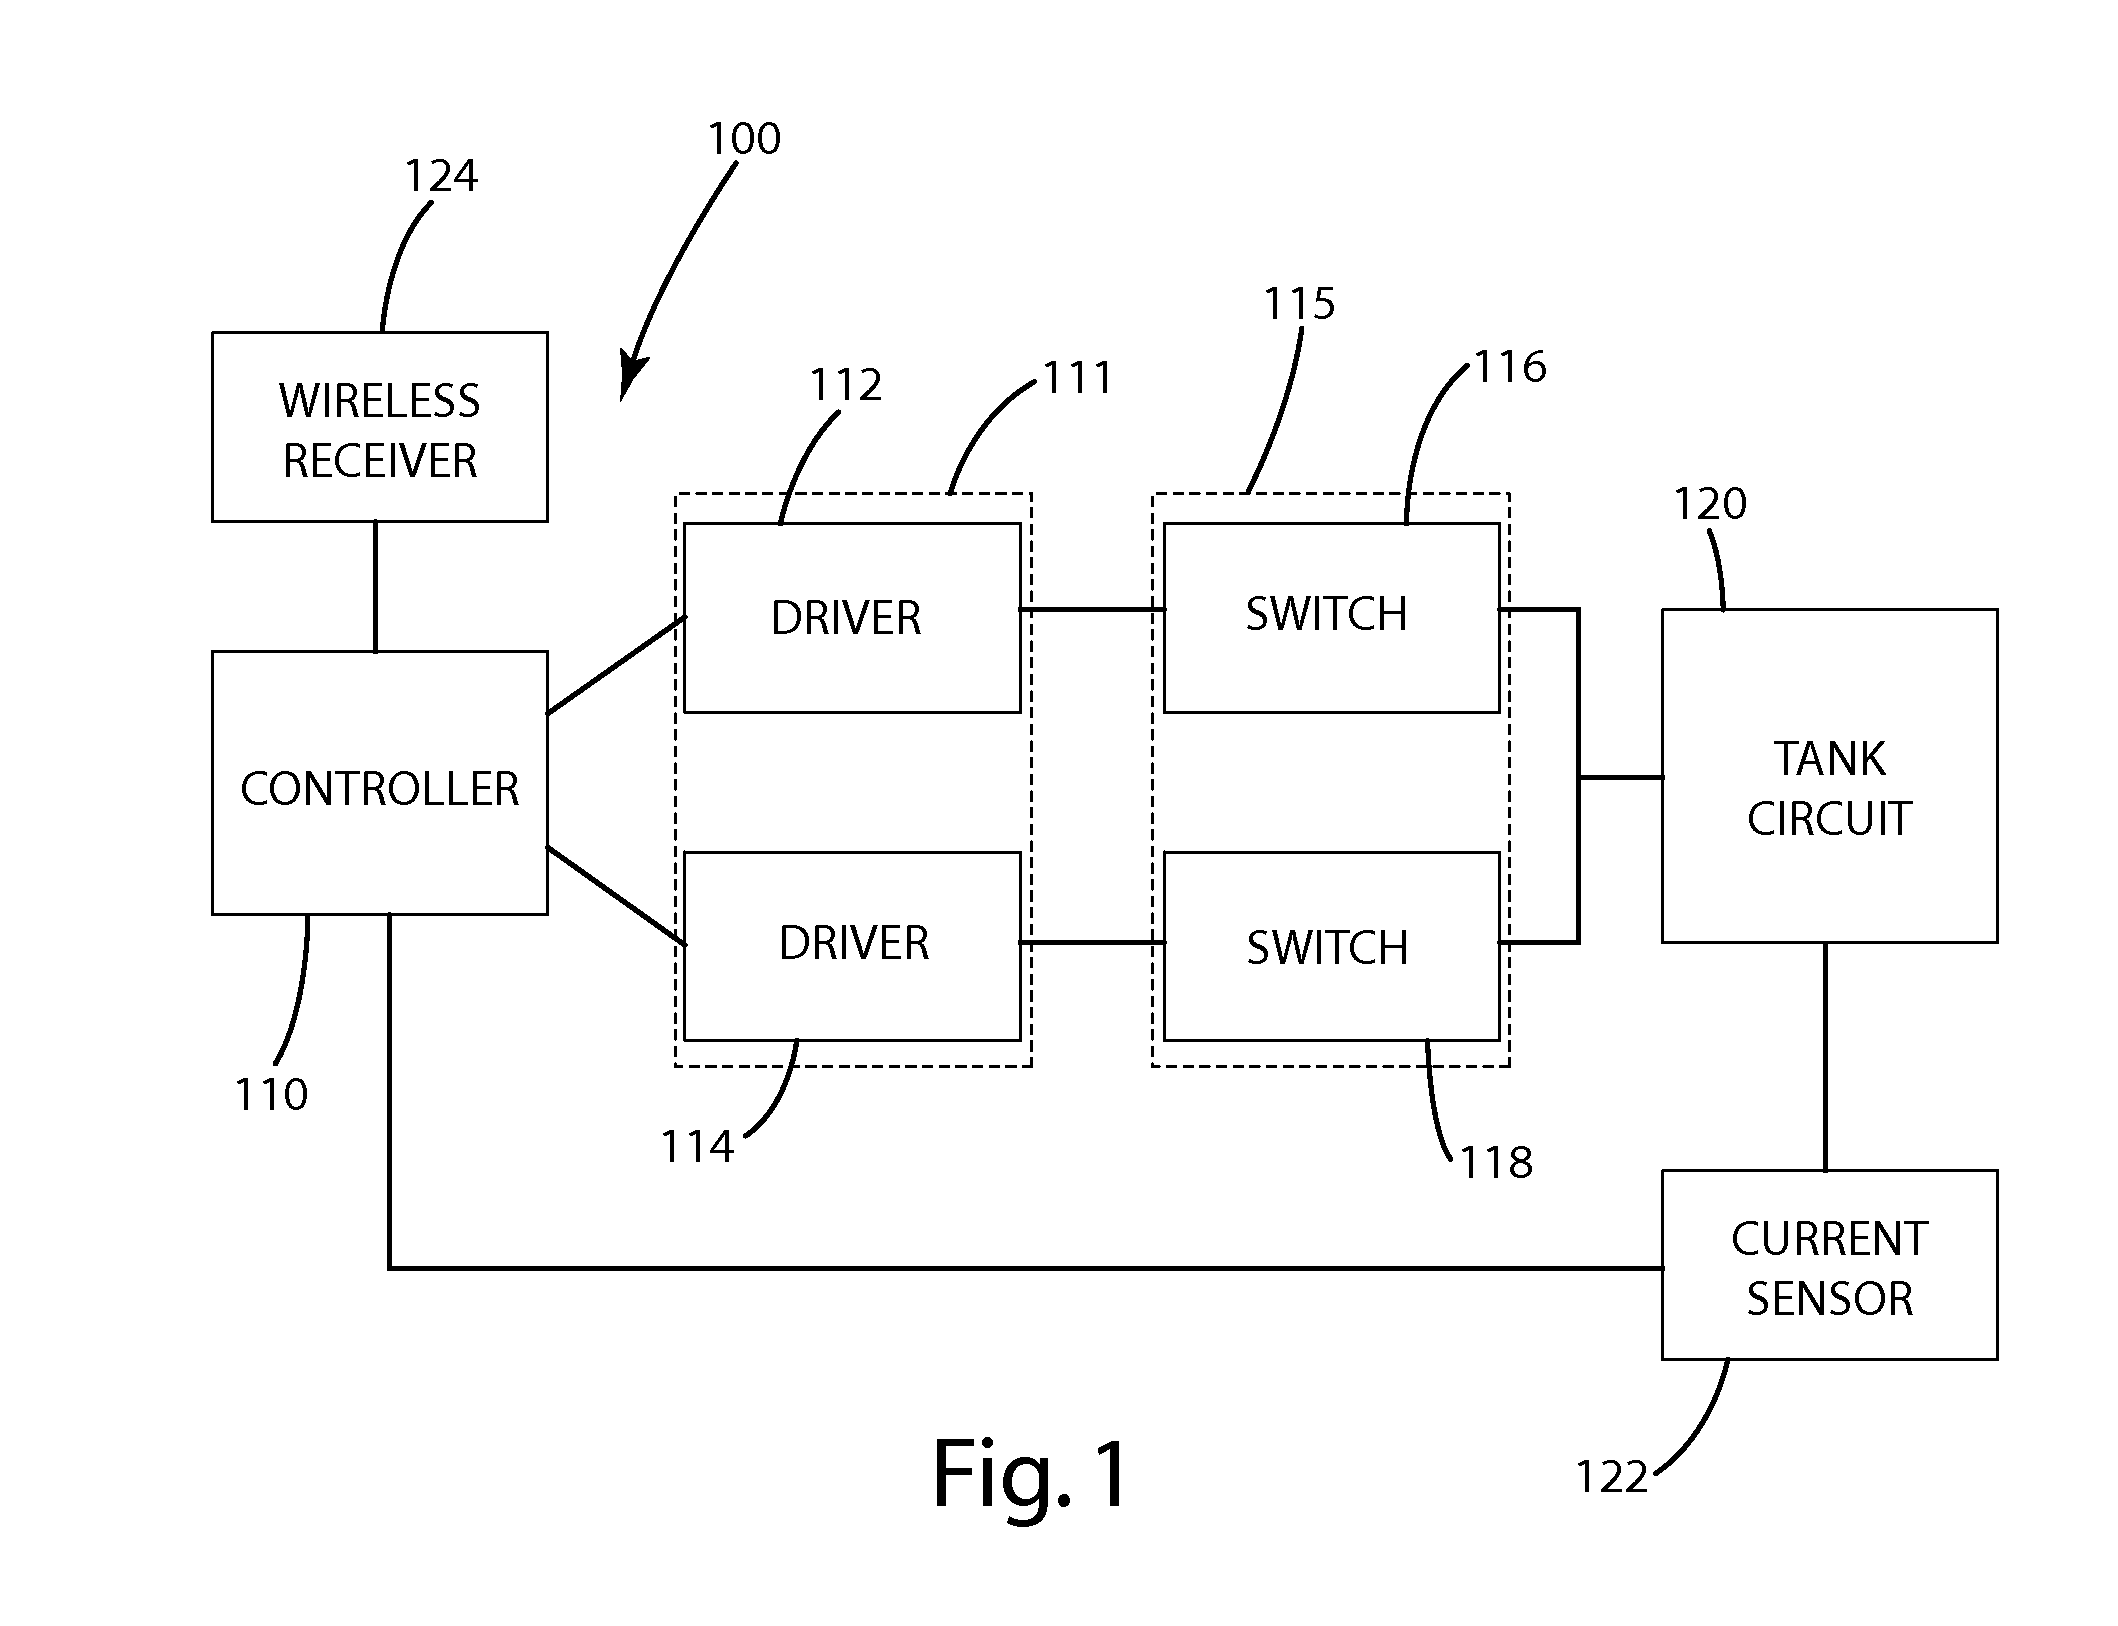 Inductive power supply with duty cycle control